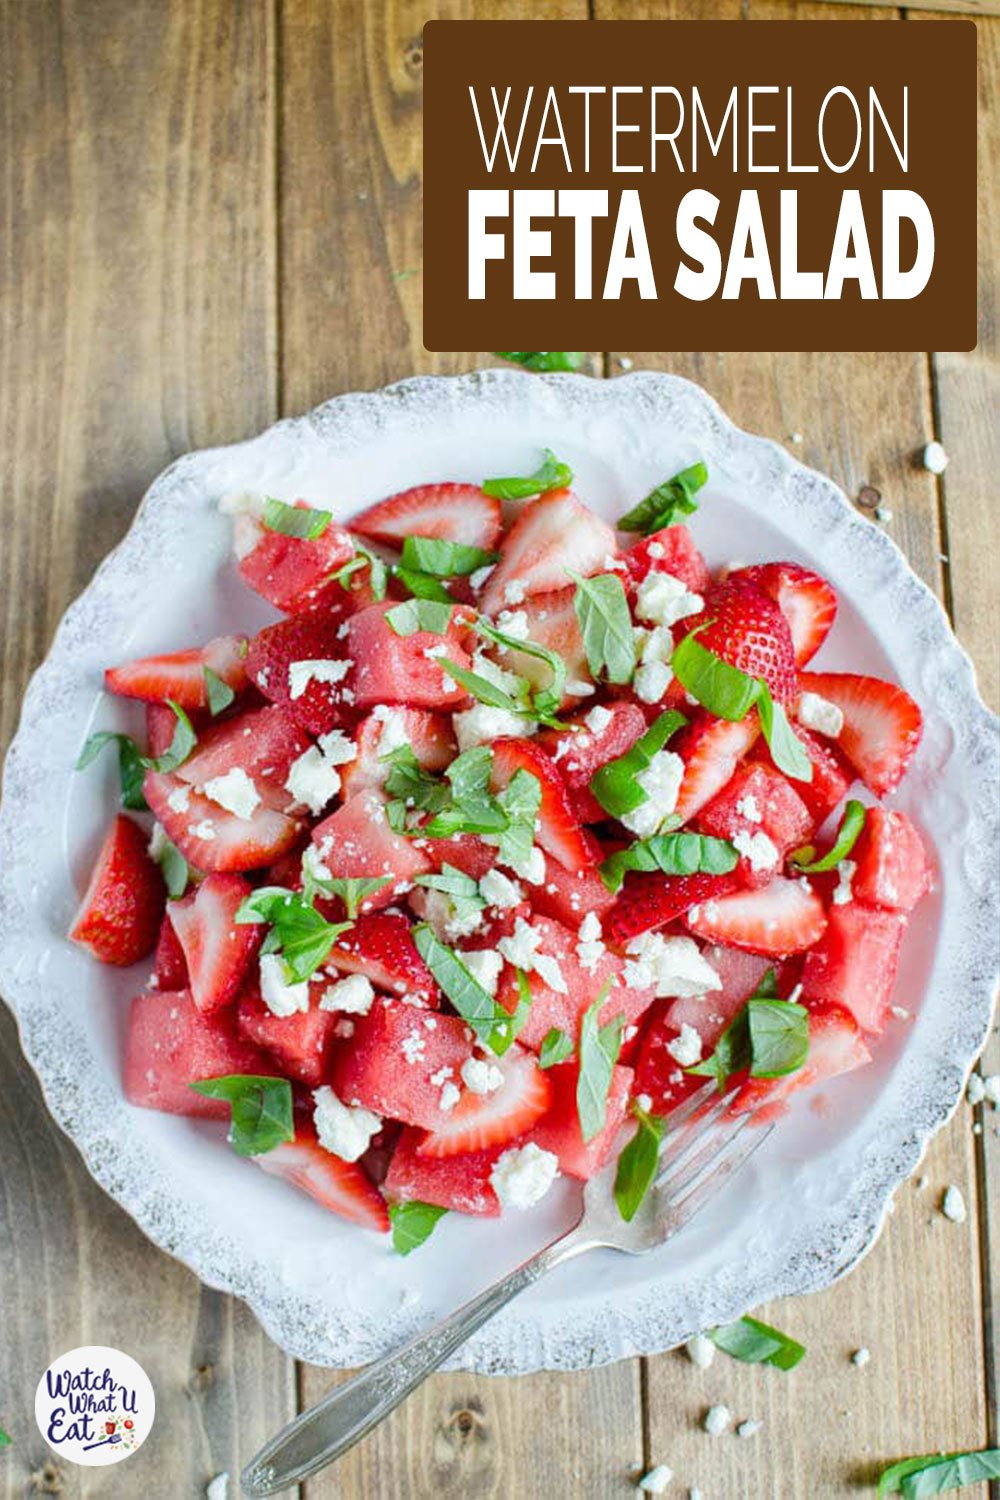 This Watermelon Feta Salad with basil is so refreshing and perfect to enjoy seasonal fruits. Super easy recipe to prepare and tons of flavors that you will want to make this summer salad again and again. #watchwhatueat #watermelonsalad #summersalad #watermelon